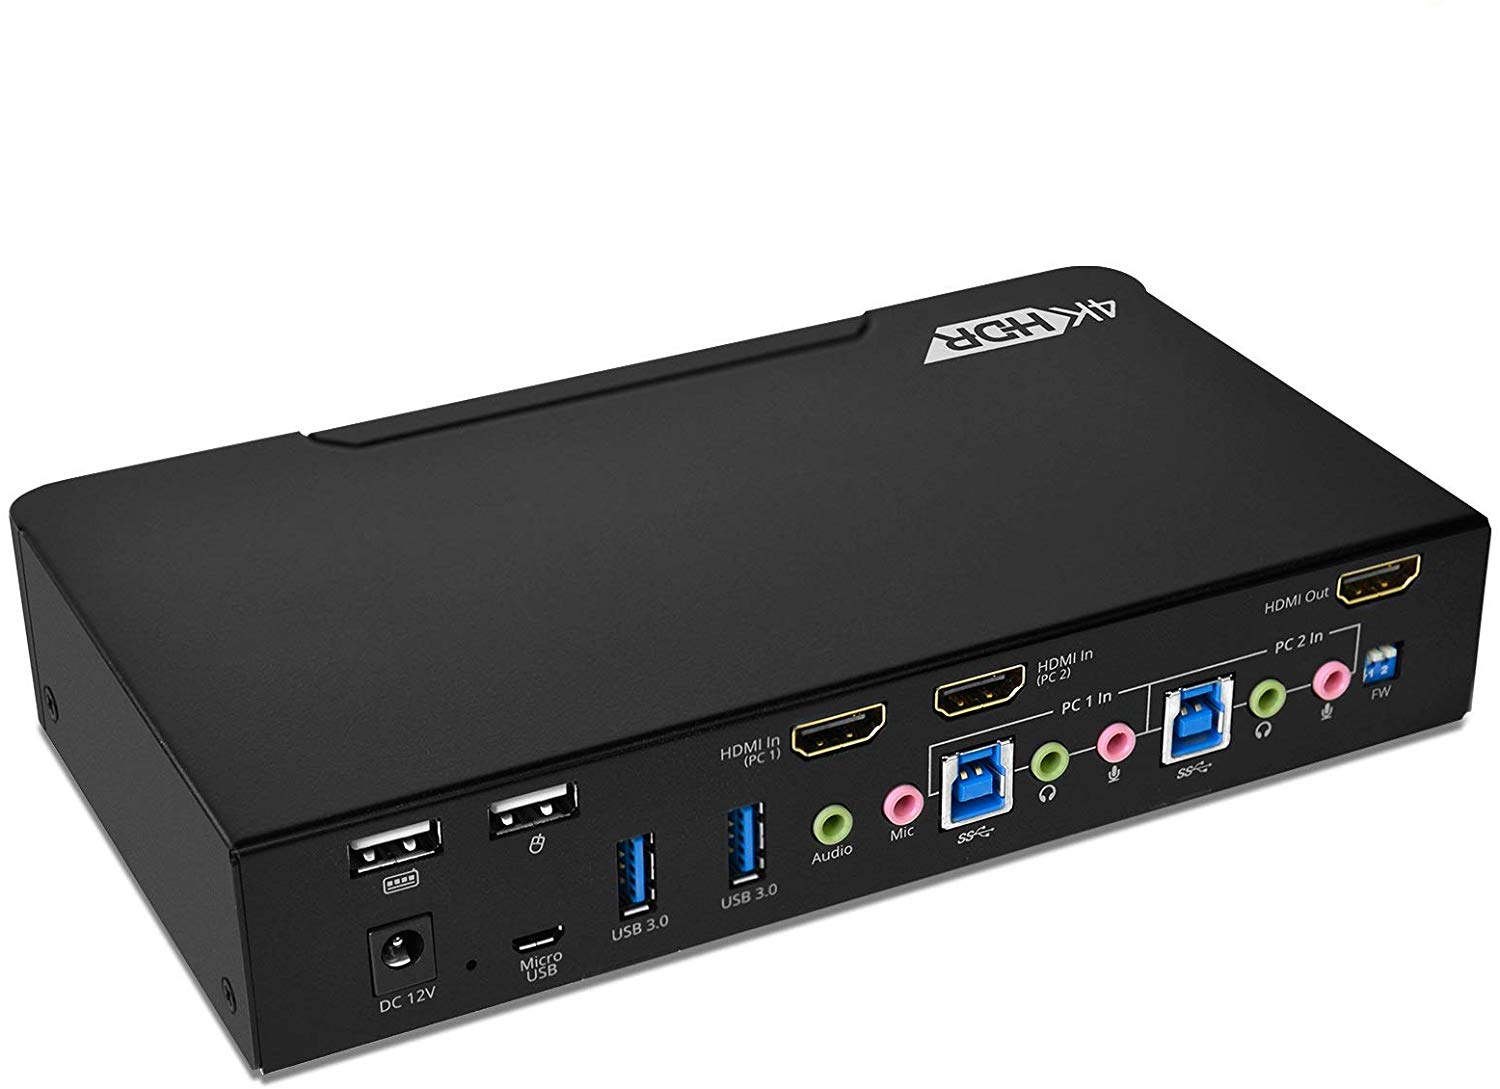 Ubuntu Linux Mac CKLau Ultra HD 4 Port HDMI 2.0 Cables KVM Switch with Audio and USB 2.0 Hub Support Keyboard Mouse Switching Max Resolution Up to 4Kx2K@60Hz 4:4:4 for Windows Raspbian